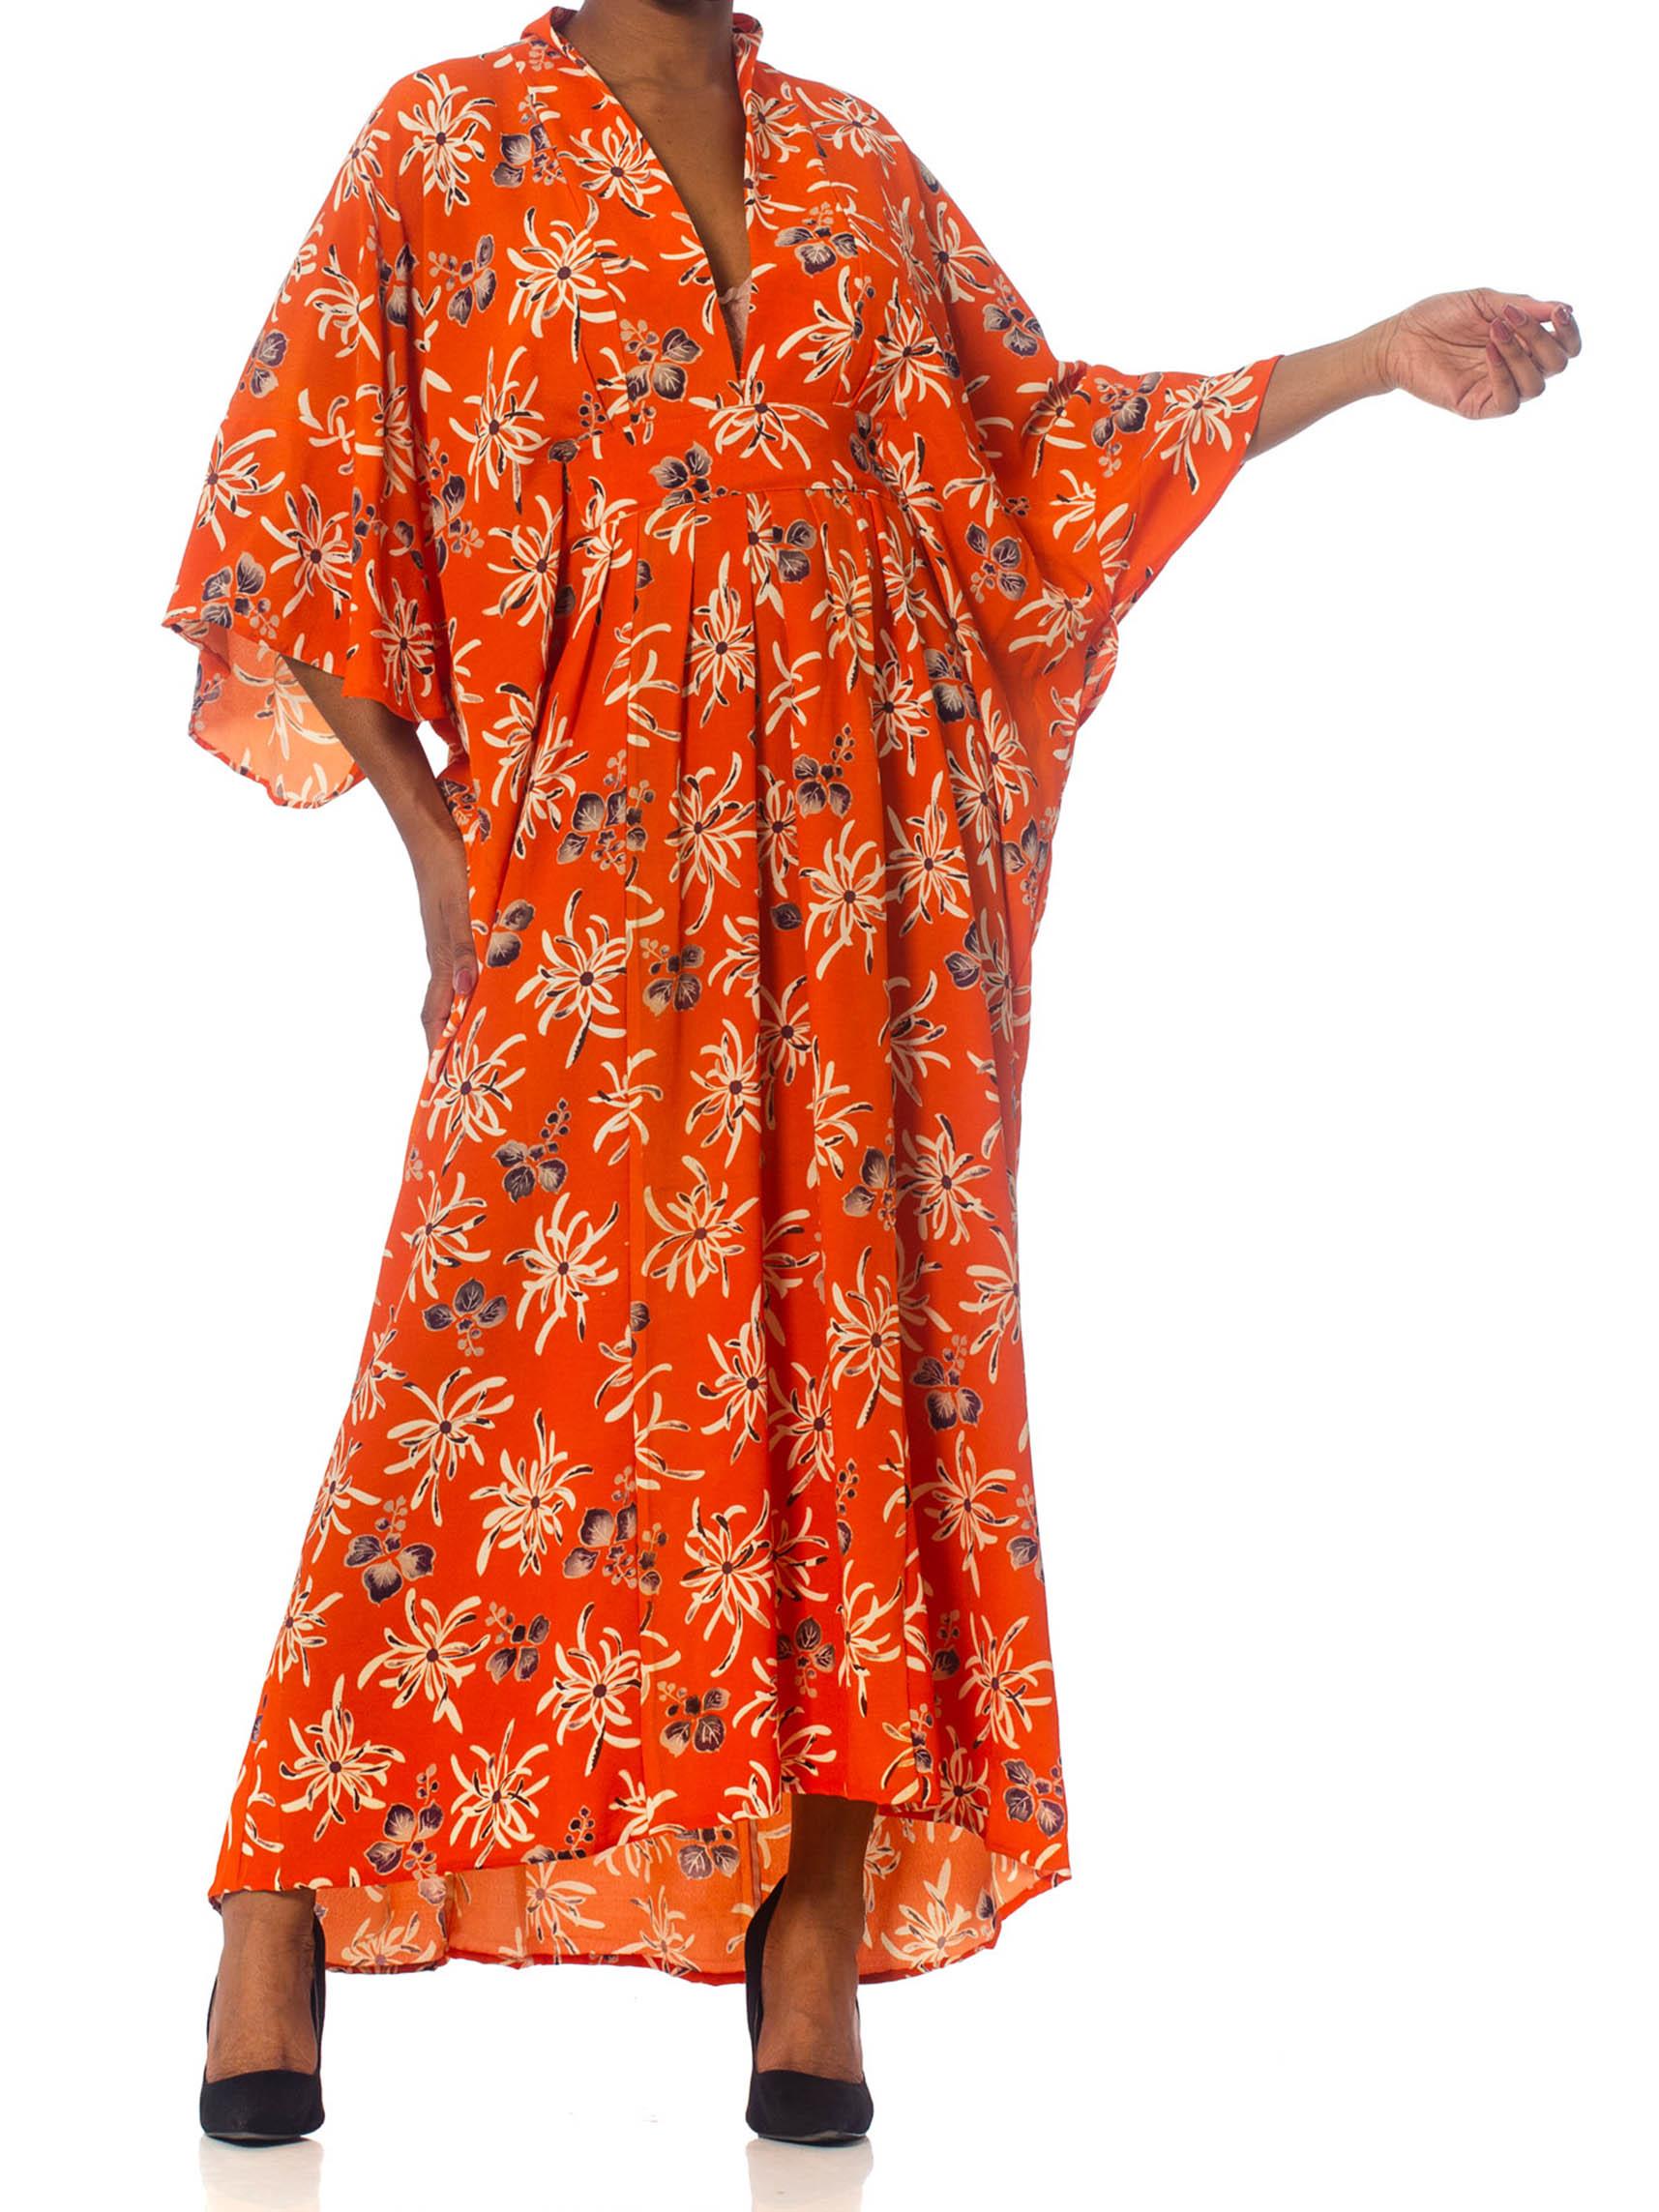 Made from antique upcycled silk so some discoloration or minor holes may be present MORPHEW COLLECTION Orange Floral Silk Kaftan Made From Japanese Kimonos 
MORPHEW COLLECTION is made entirely by hand in our NYC Ateliér of rare antique materials